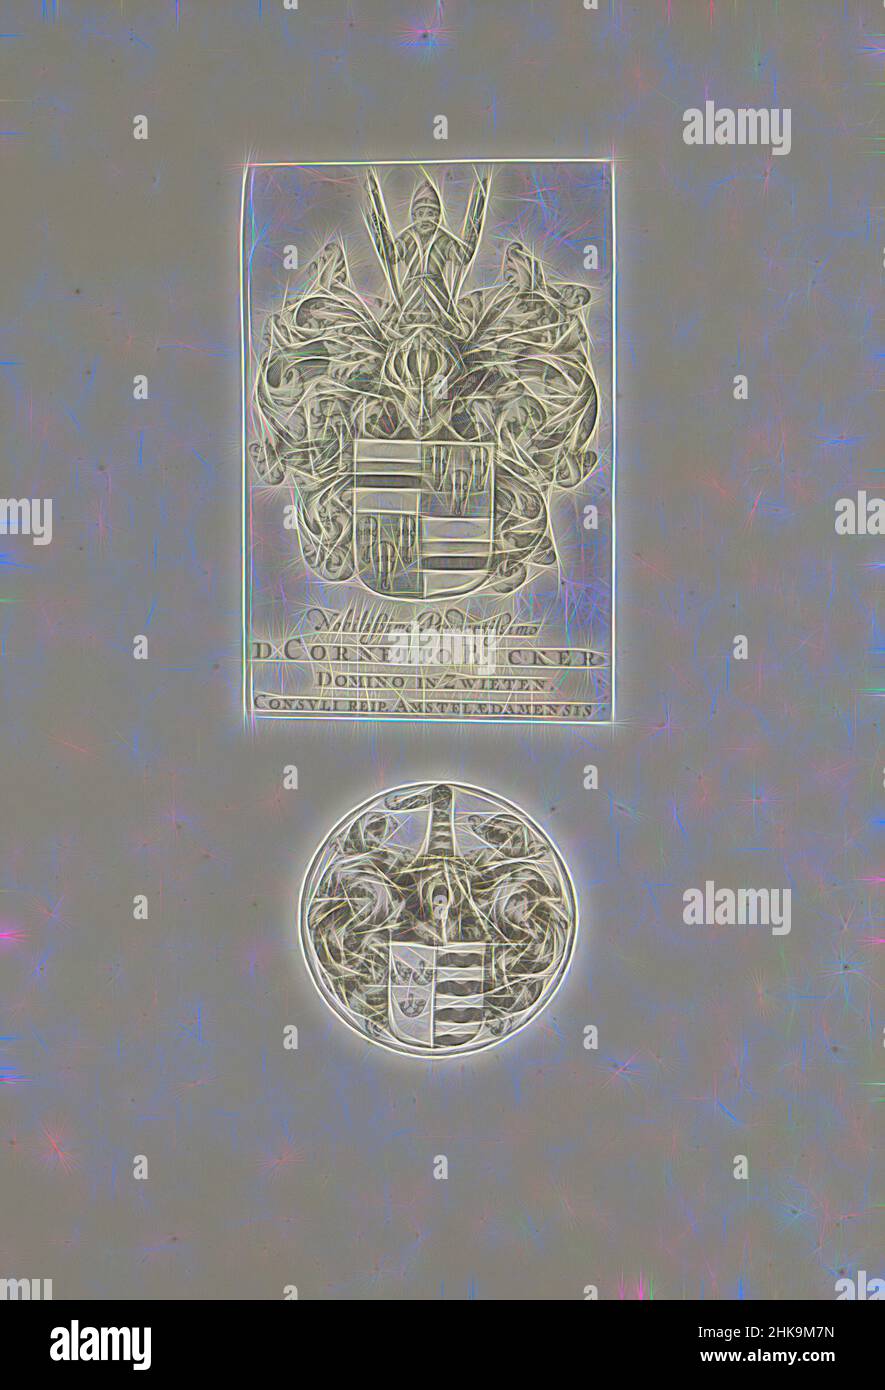 Inspired by Two arms, Two representations on an album page. At the top, the coat of arms of Cornelis Bicker, lord of Swieten. The representation was originally part of the print titled 'Amphitheatrum Vespasiani, nunc vulgo Il Coliseo'. Underneath is an as yet unidentified coat of arms with three, Reimagined by Artotop. Classic art reinvented with a modern twist. Design of warm cheerful glowing of brightness and light ray radiance. Photography inspired by surrealism and futurism, embracing dynamic energy of modern technology, movement, speed and revolutionize culture Stock Photo